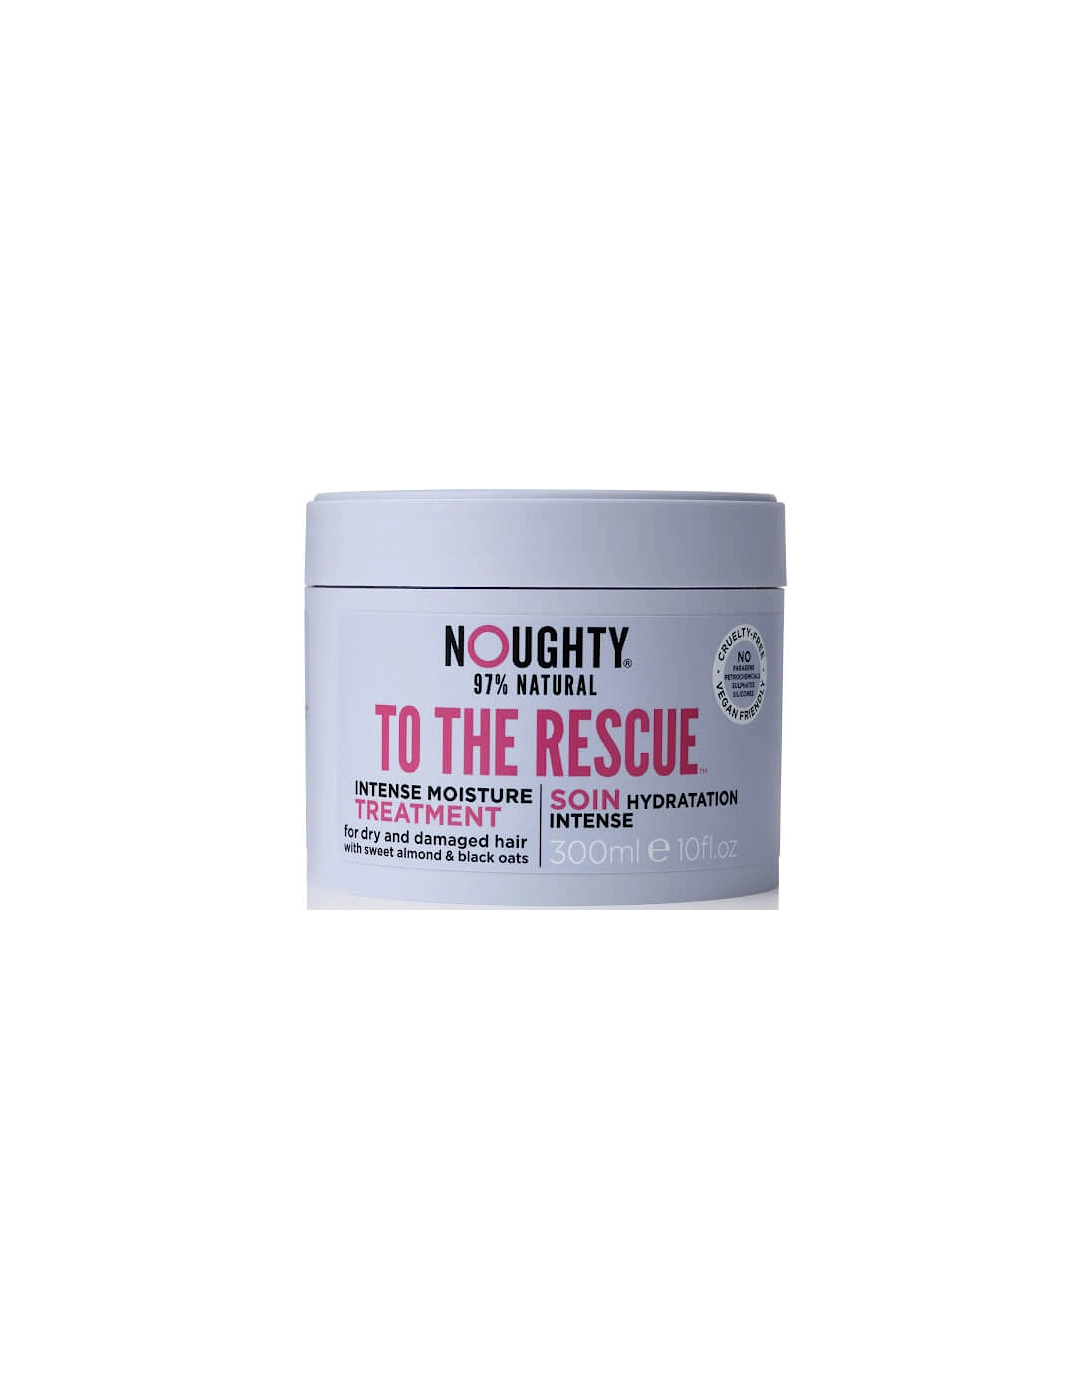 To the Rescue Intense Moisture Treatment 300ml - Noughty, 2 of 1